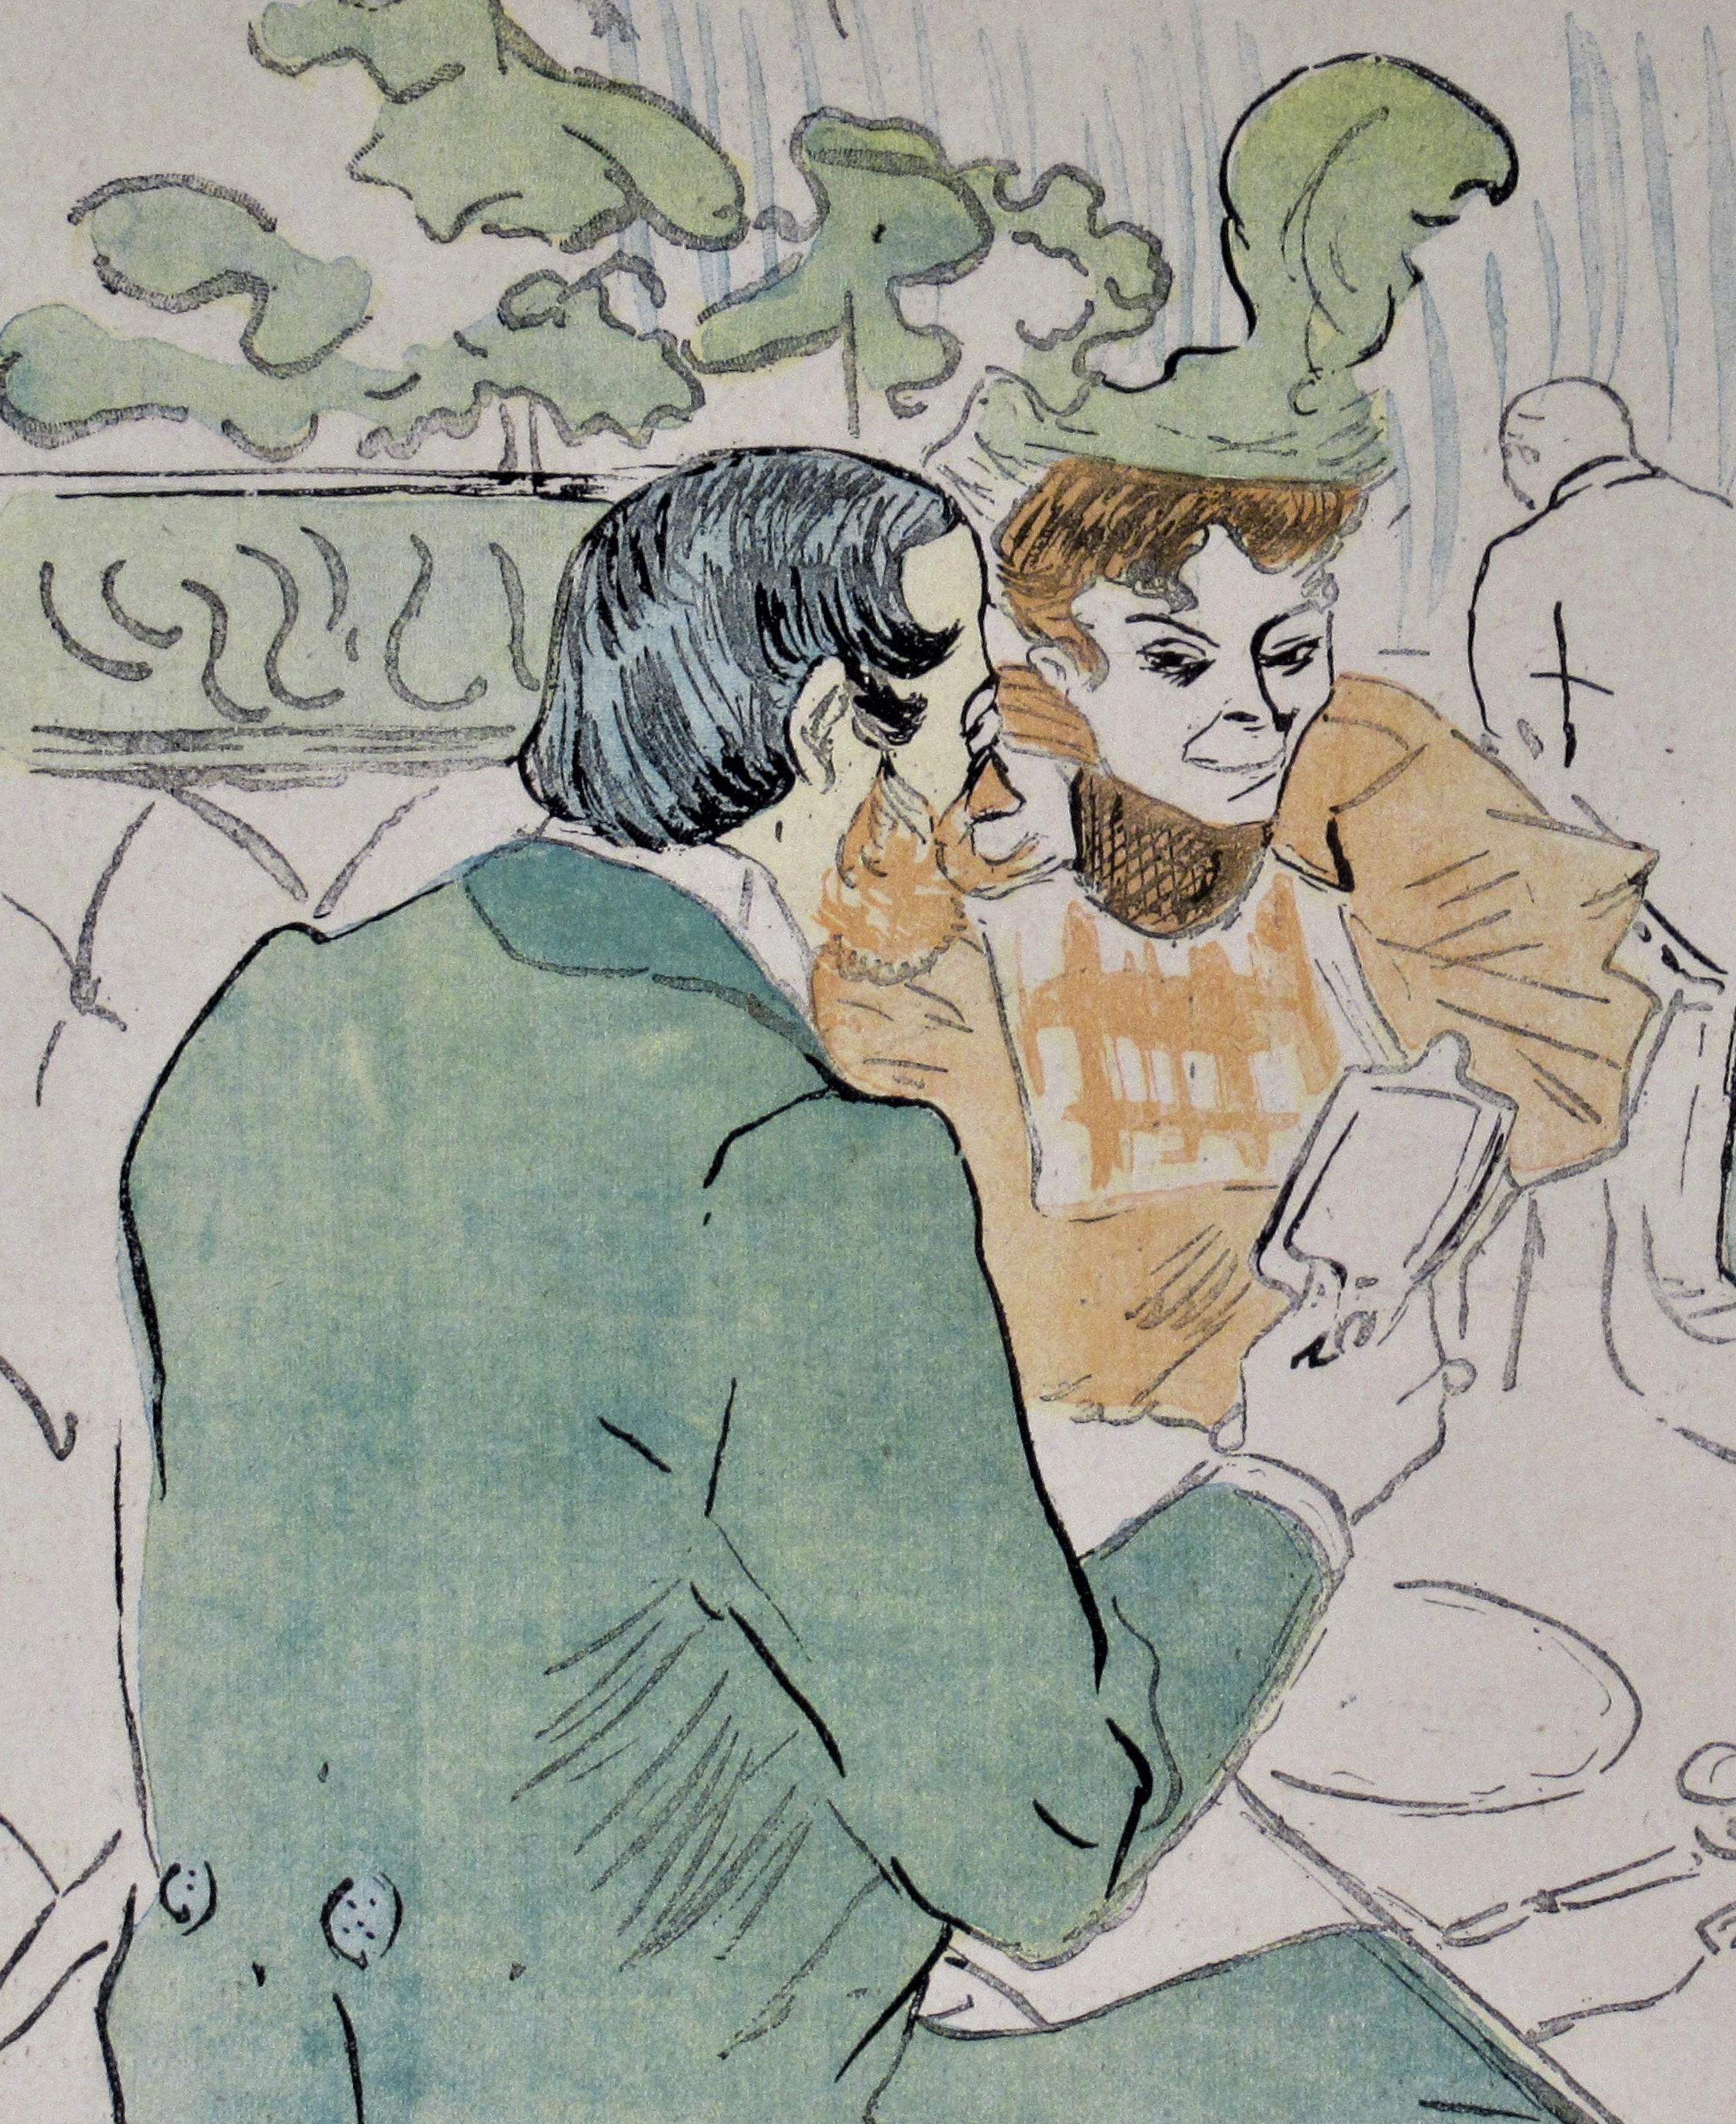 toulouse-lautrec painting owned by john lennon